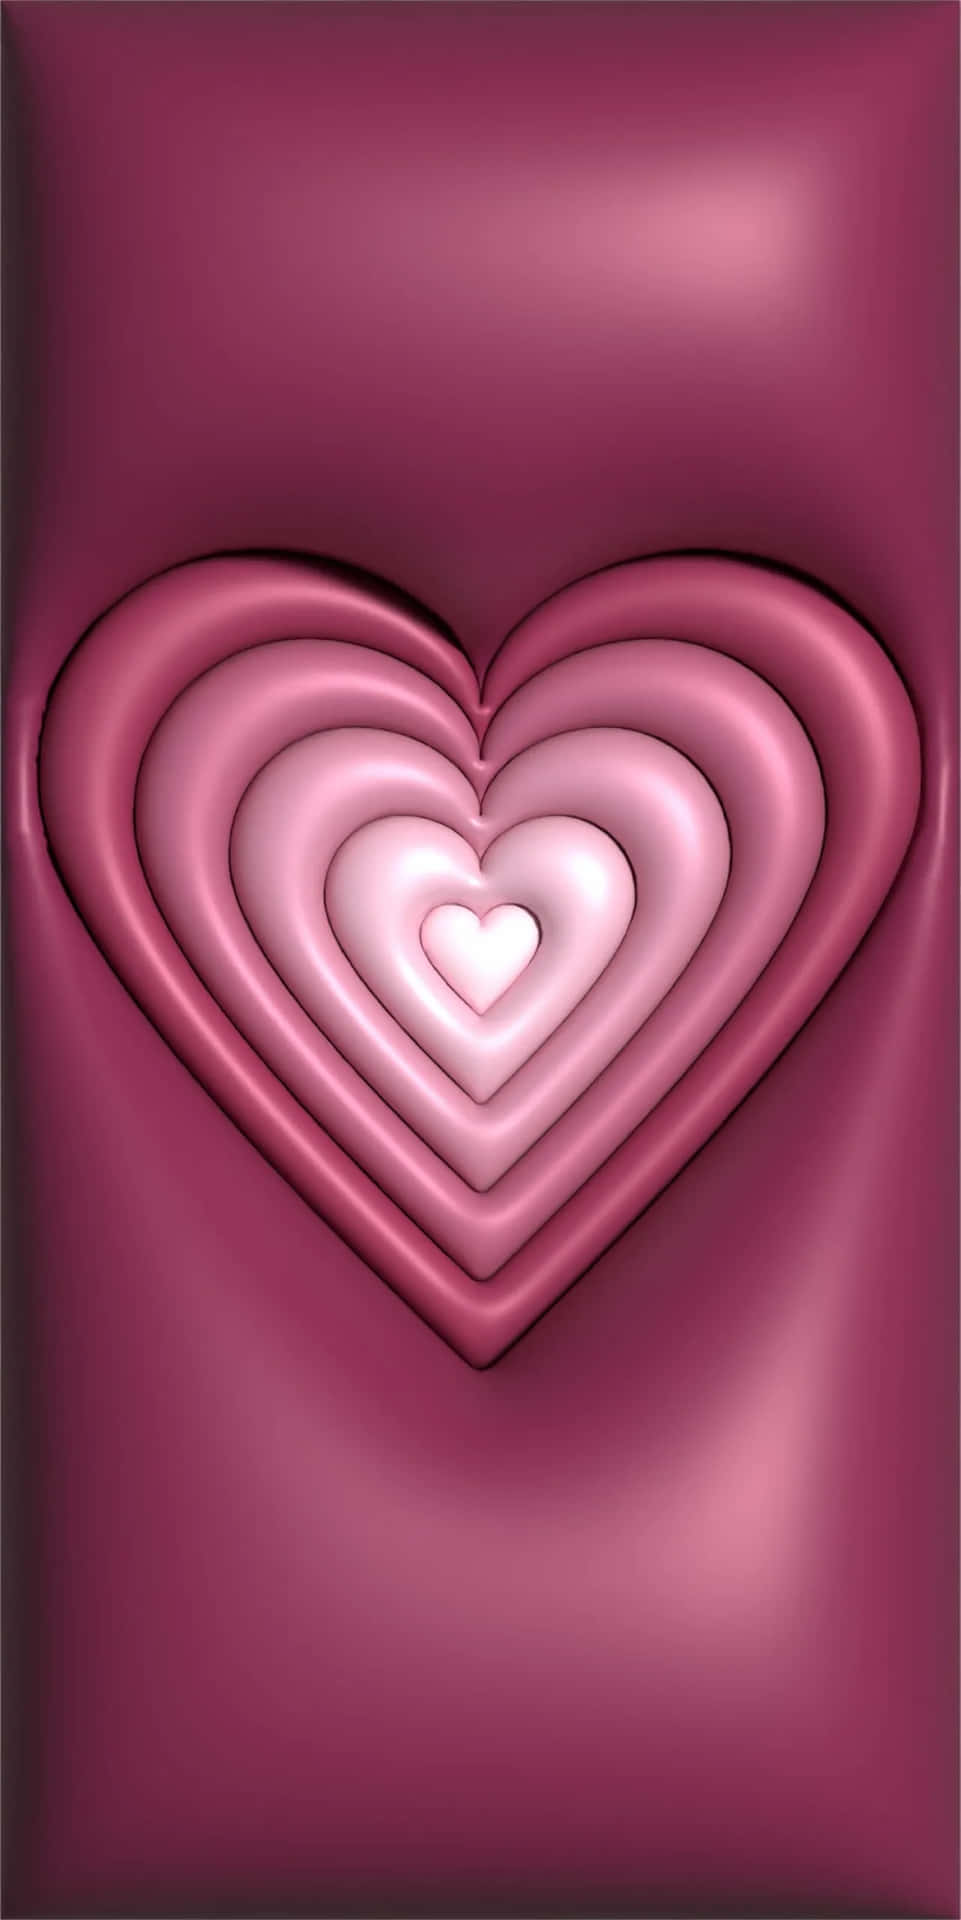 Nested Hearts3 D Aesthetic Pink Backdrop Wallpaper